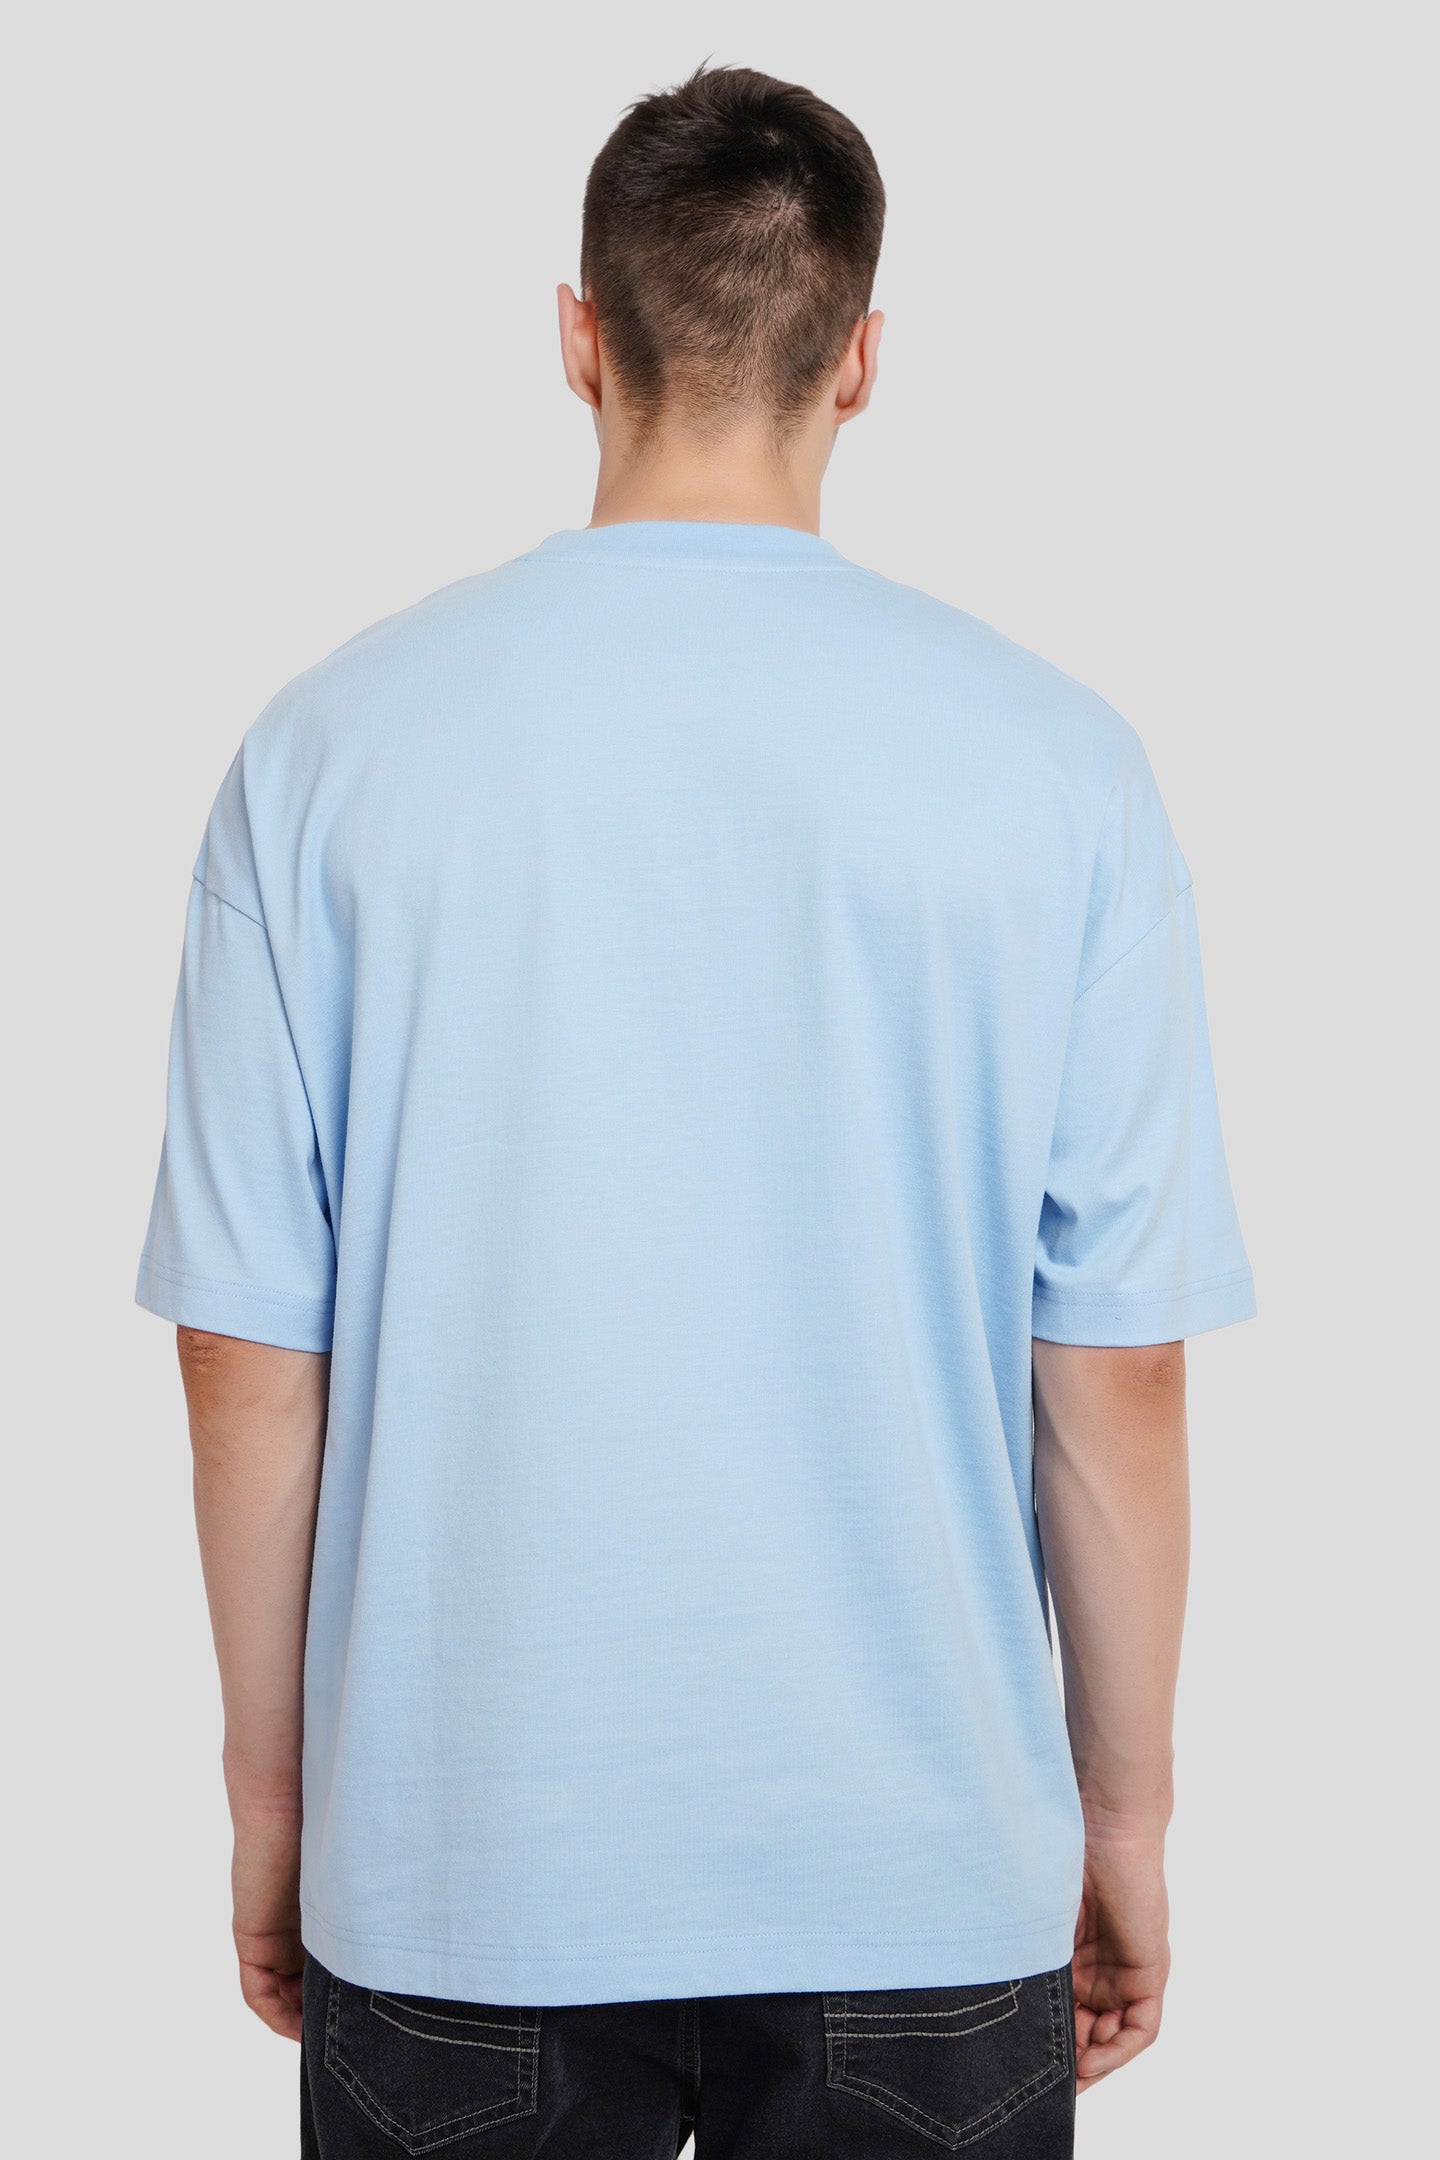 Swag Powder Blue Printed T Shirt Men Baggy Fit With Front Design Pic 2